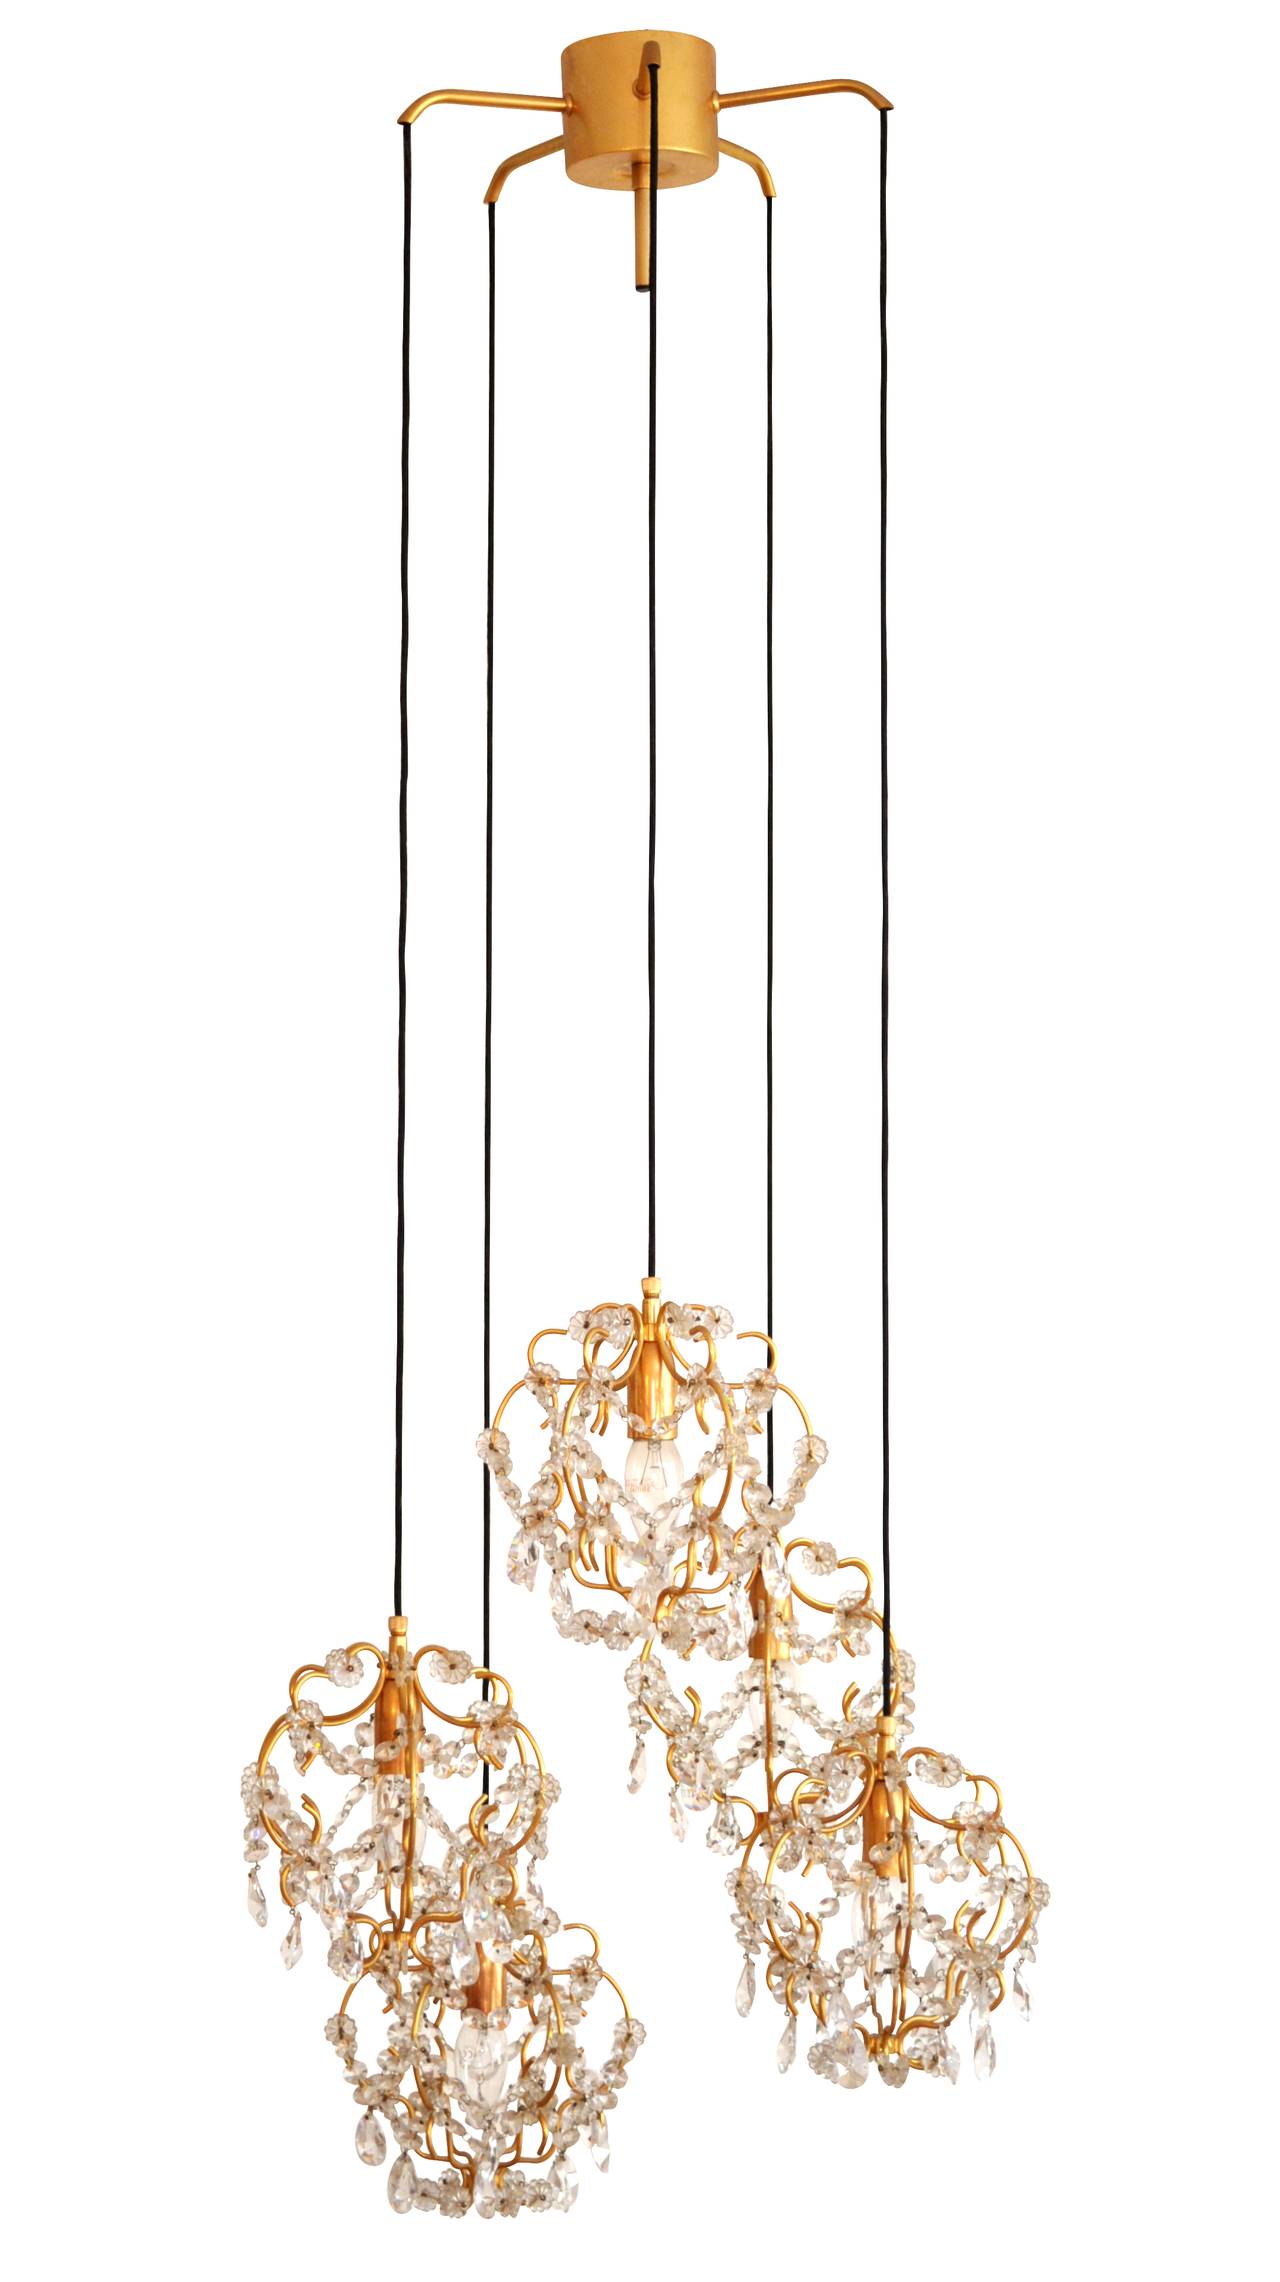 A wonderful gilt brass hanging light fixture with five lights in the style of Lobmeyr, Palwa or Sciolari manufactured in Mid-Century, circa 1960.
It is made of gold-plated brass lamp shades decorated with cut crystal glass. Each lamp shade can be